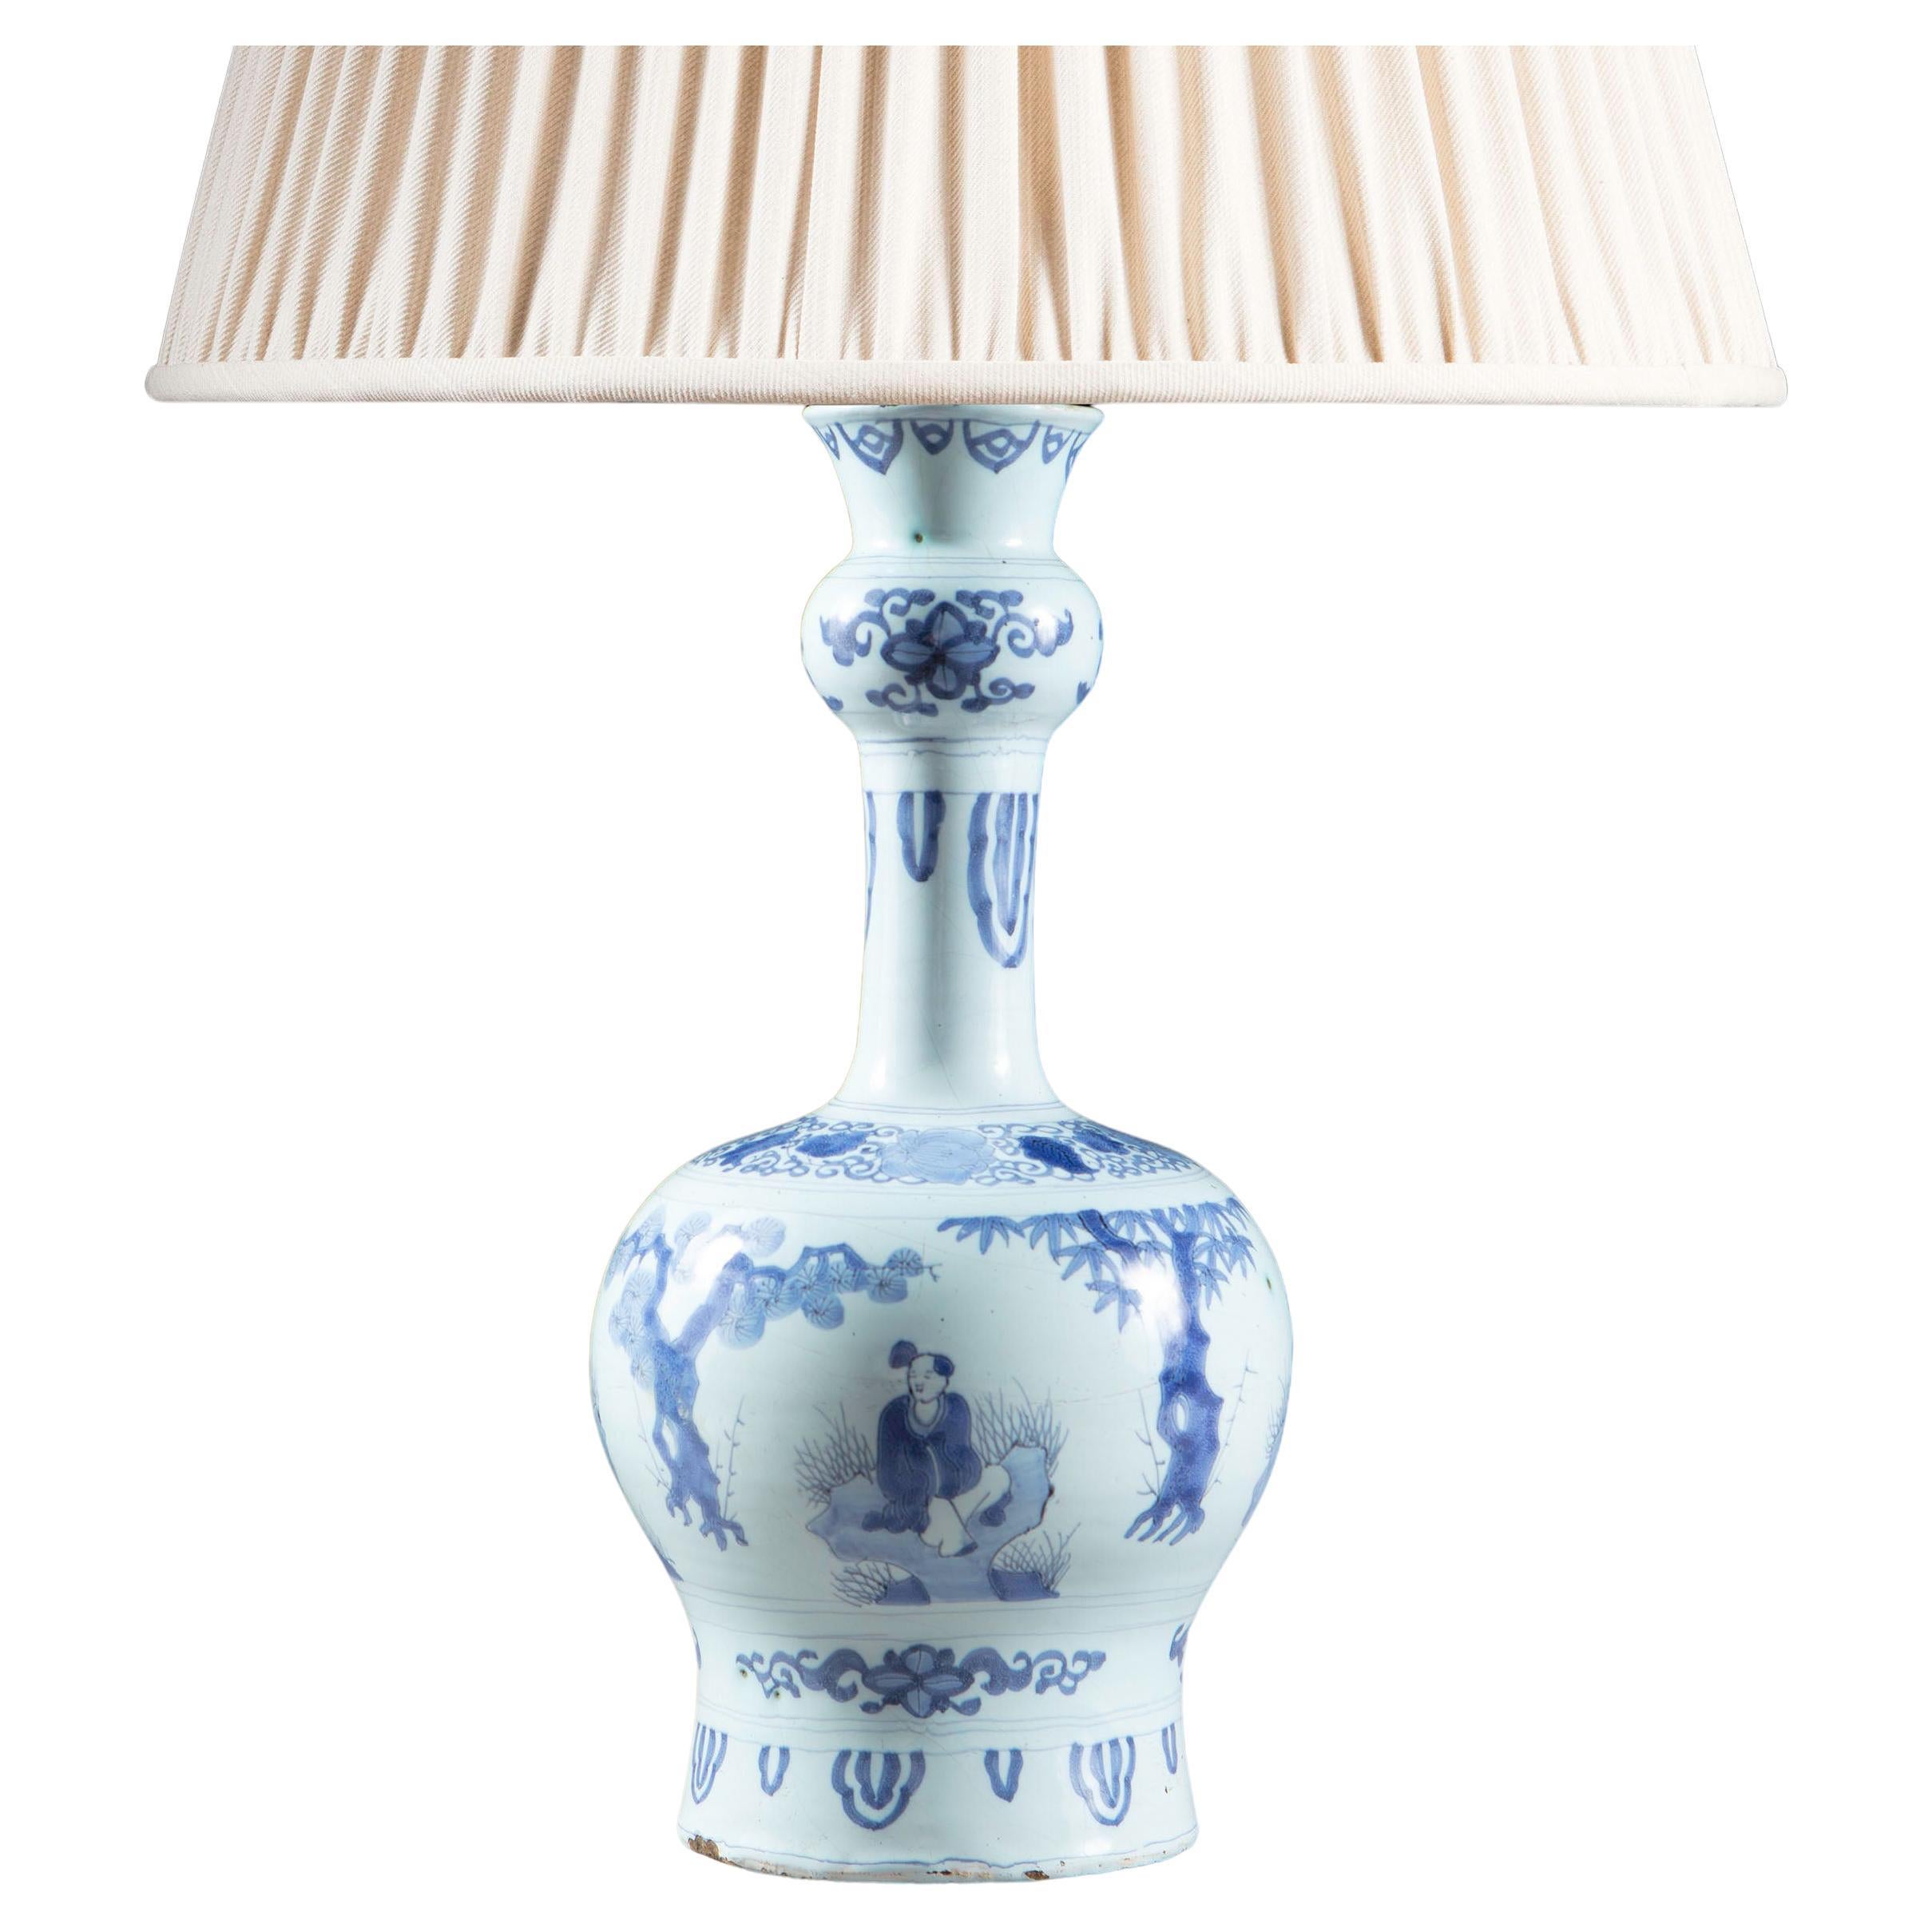 Early 18th Century Dutch Delft Knobble Vases Mounted as Table Lamp